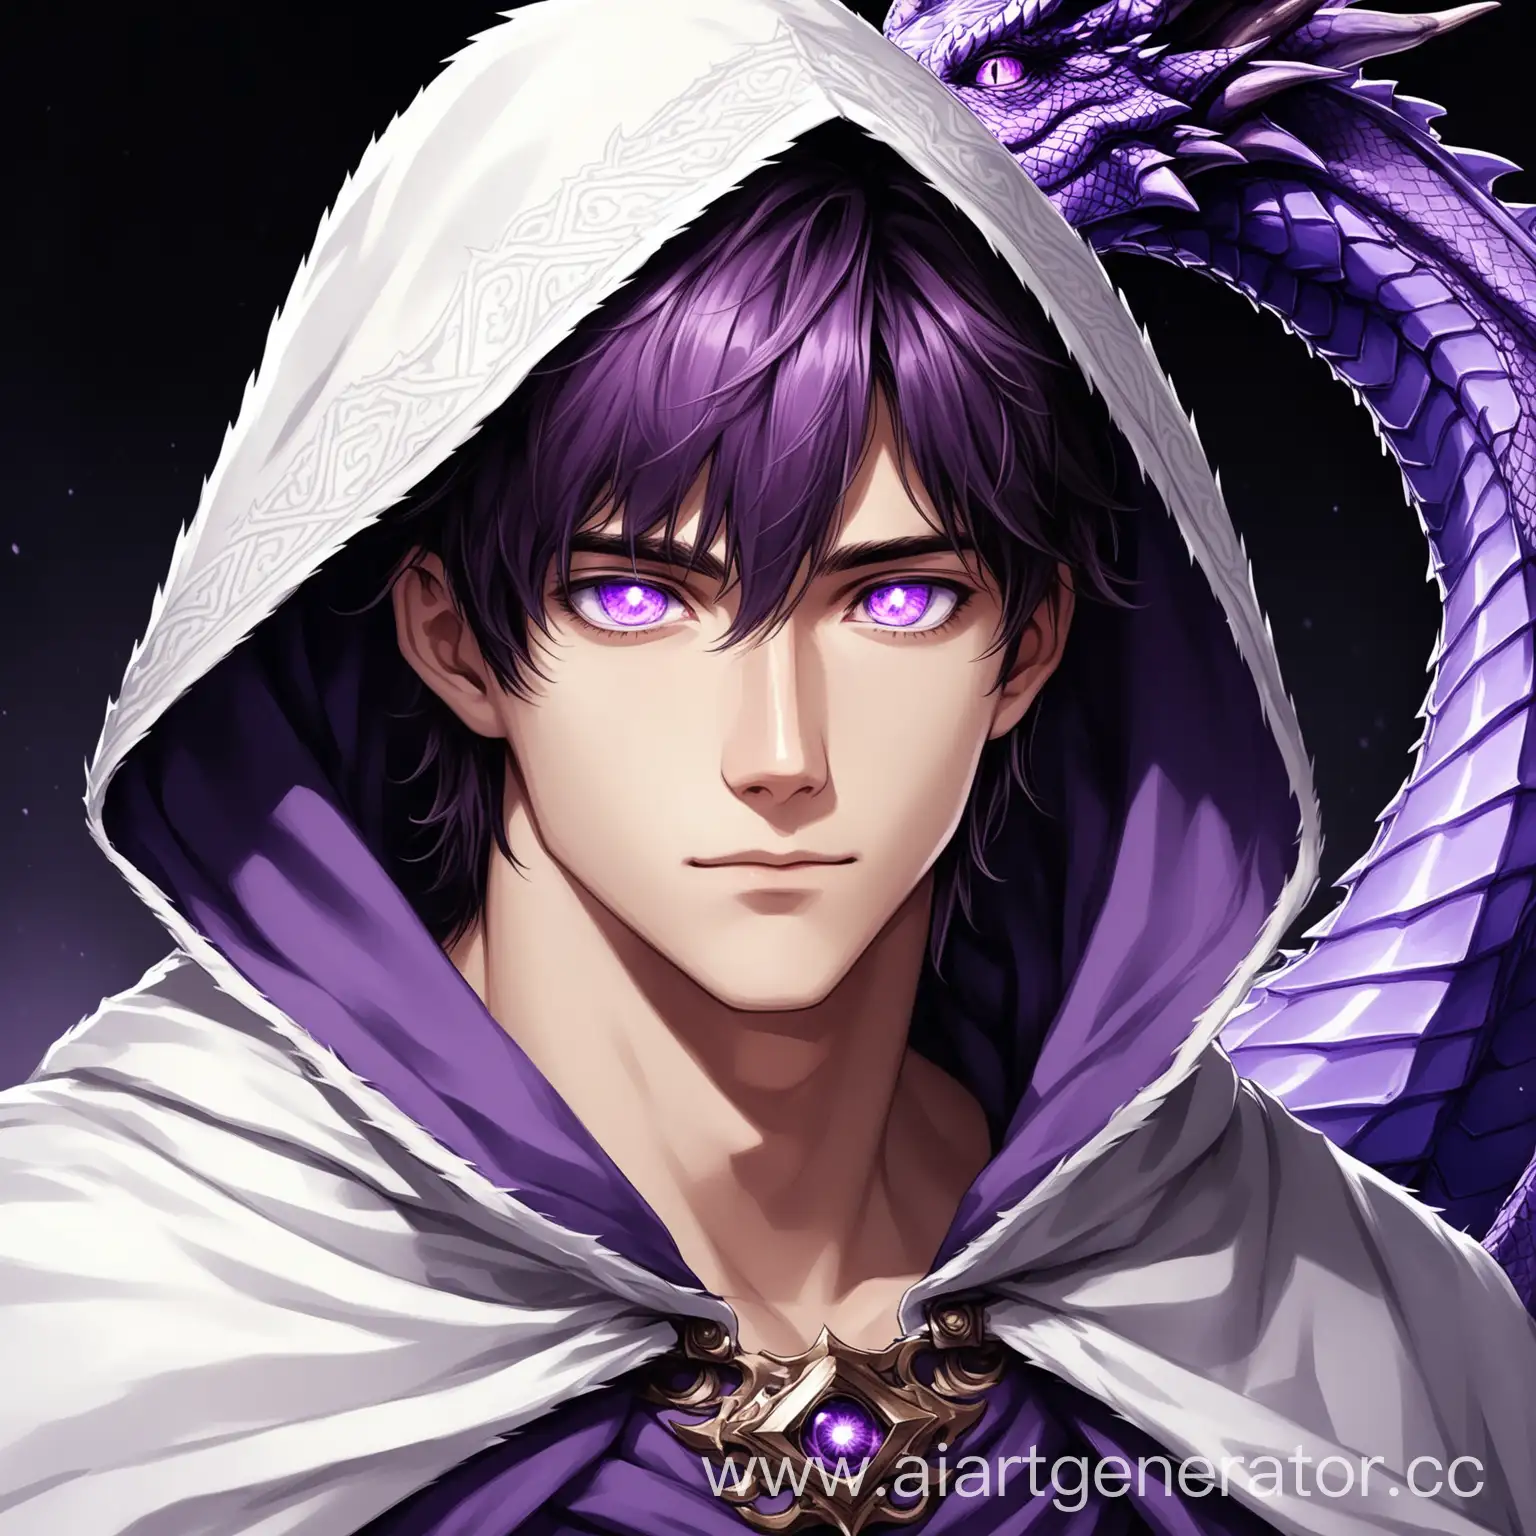 Young-Man-with-Purple-Dragon-Eyes-in-WhitePurple-Cloak